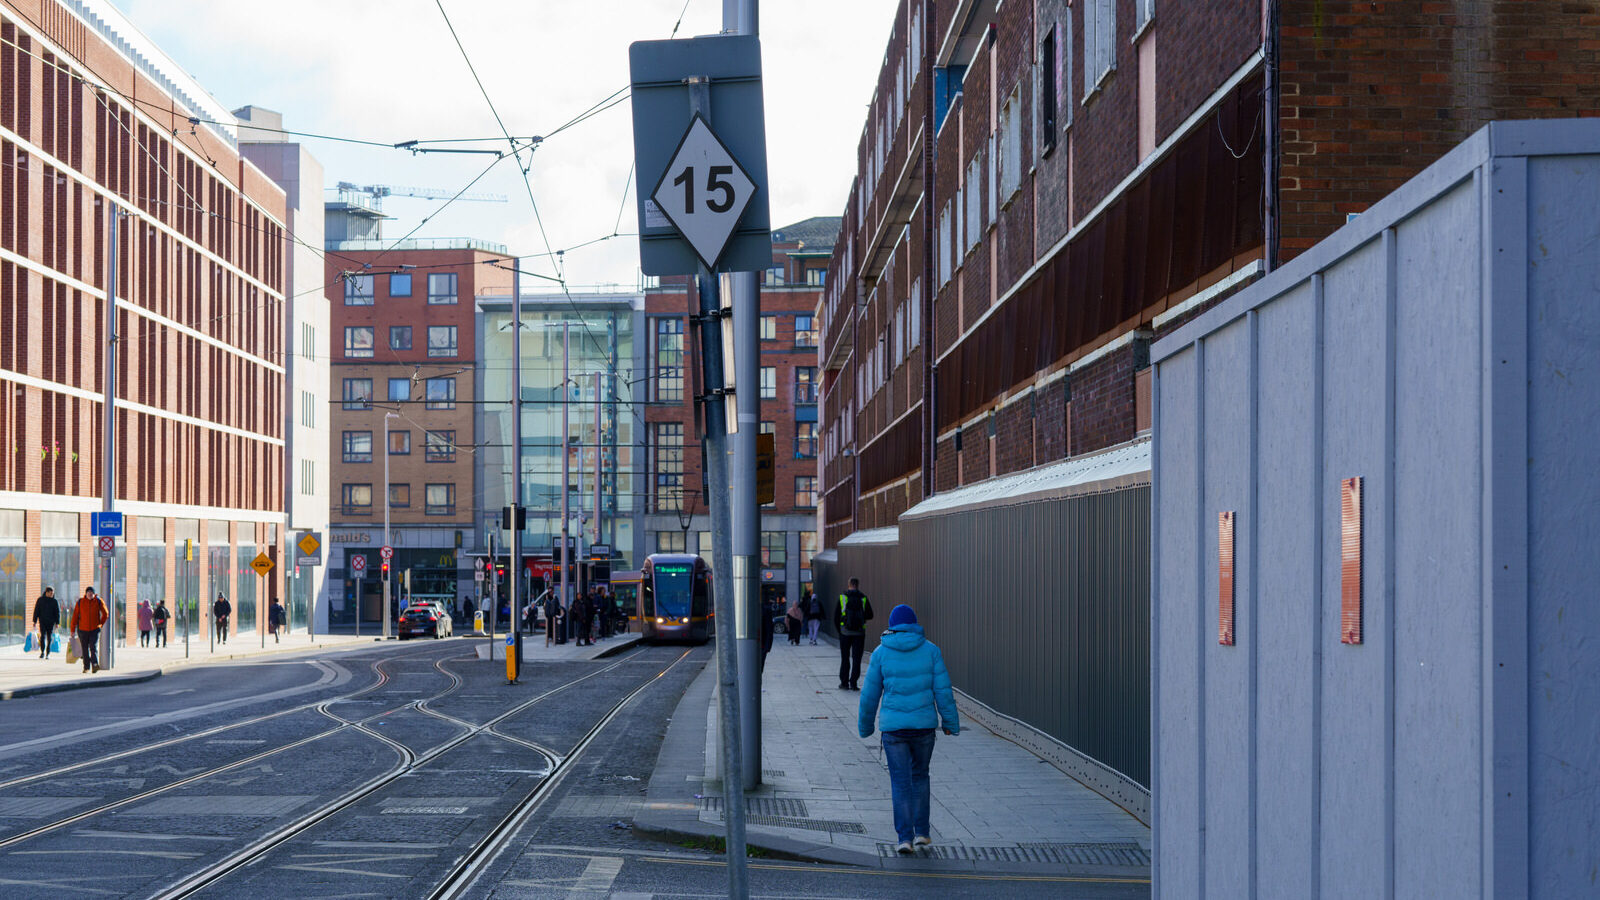 LUAS TRAM STOP AT LOWER DOMINICK STREET [AT THE MOMENT THE AREA DOES FEEL SAFER]-228681-1